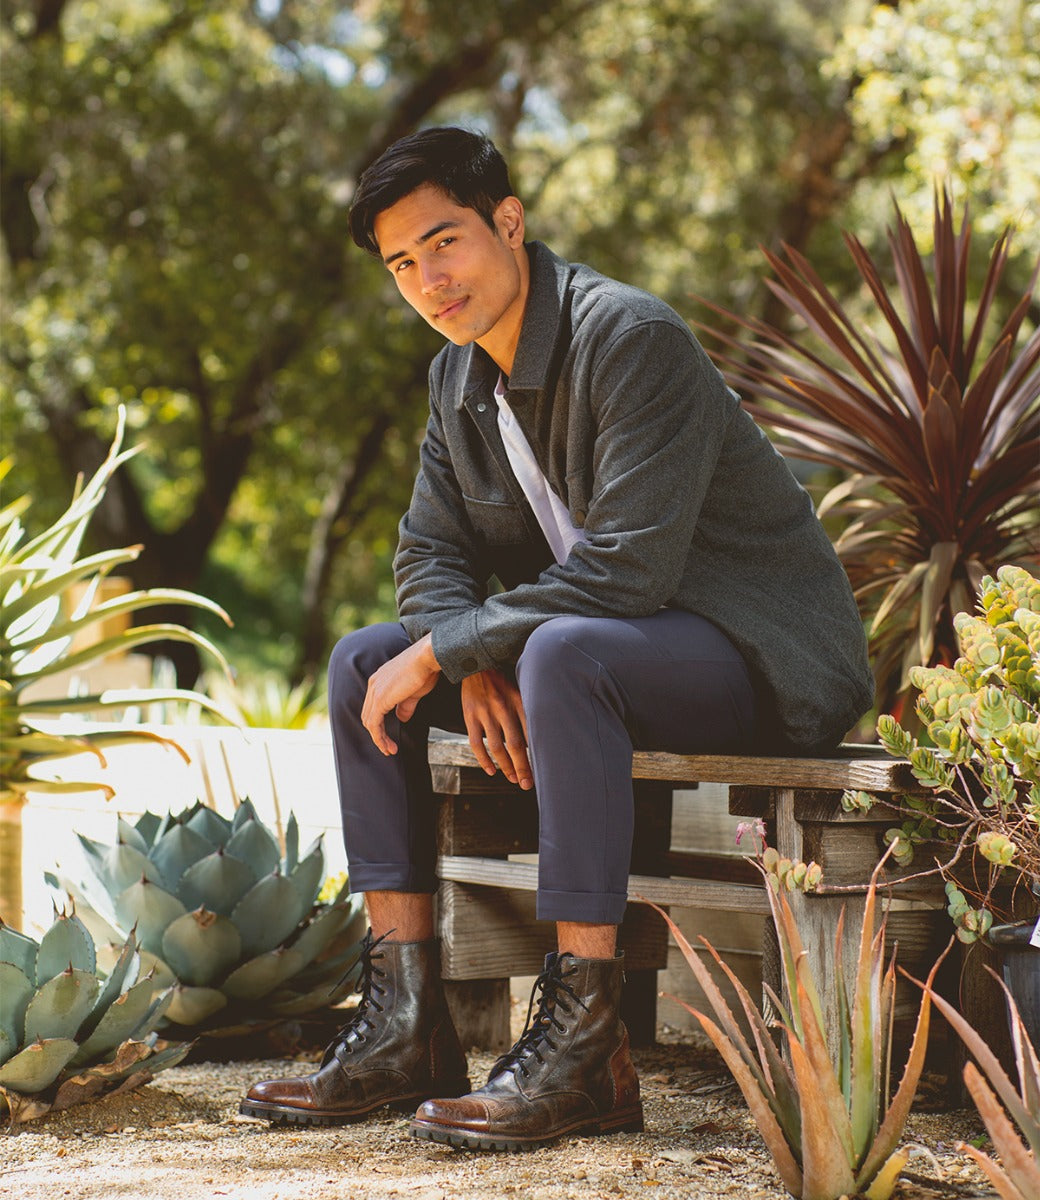 A young man sits on a wooden bench outdoors, dressed in a grey jacket and blue trousers, sporting Bed Stu Protege Trek combat style boots, surrounded by lush greenery.